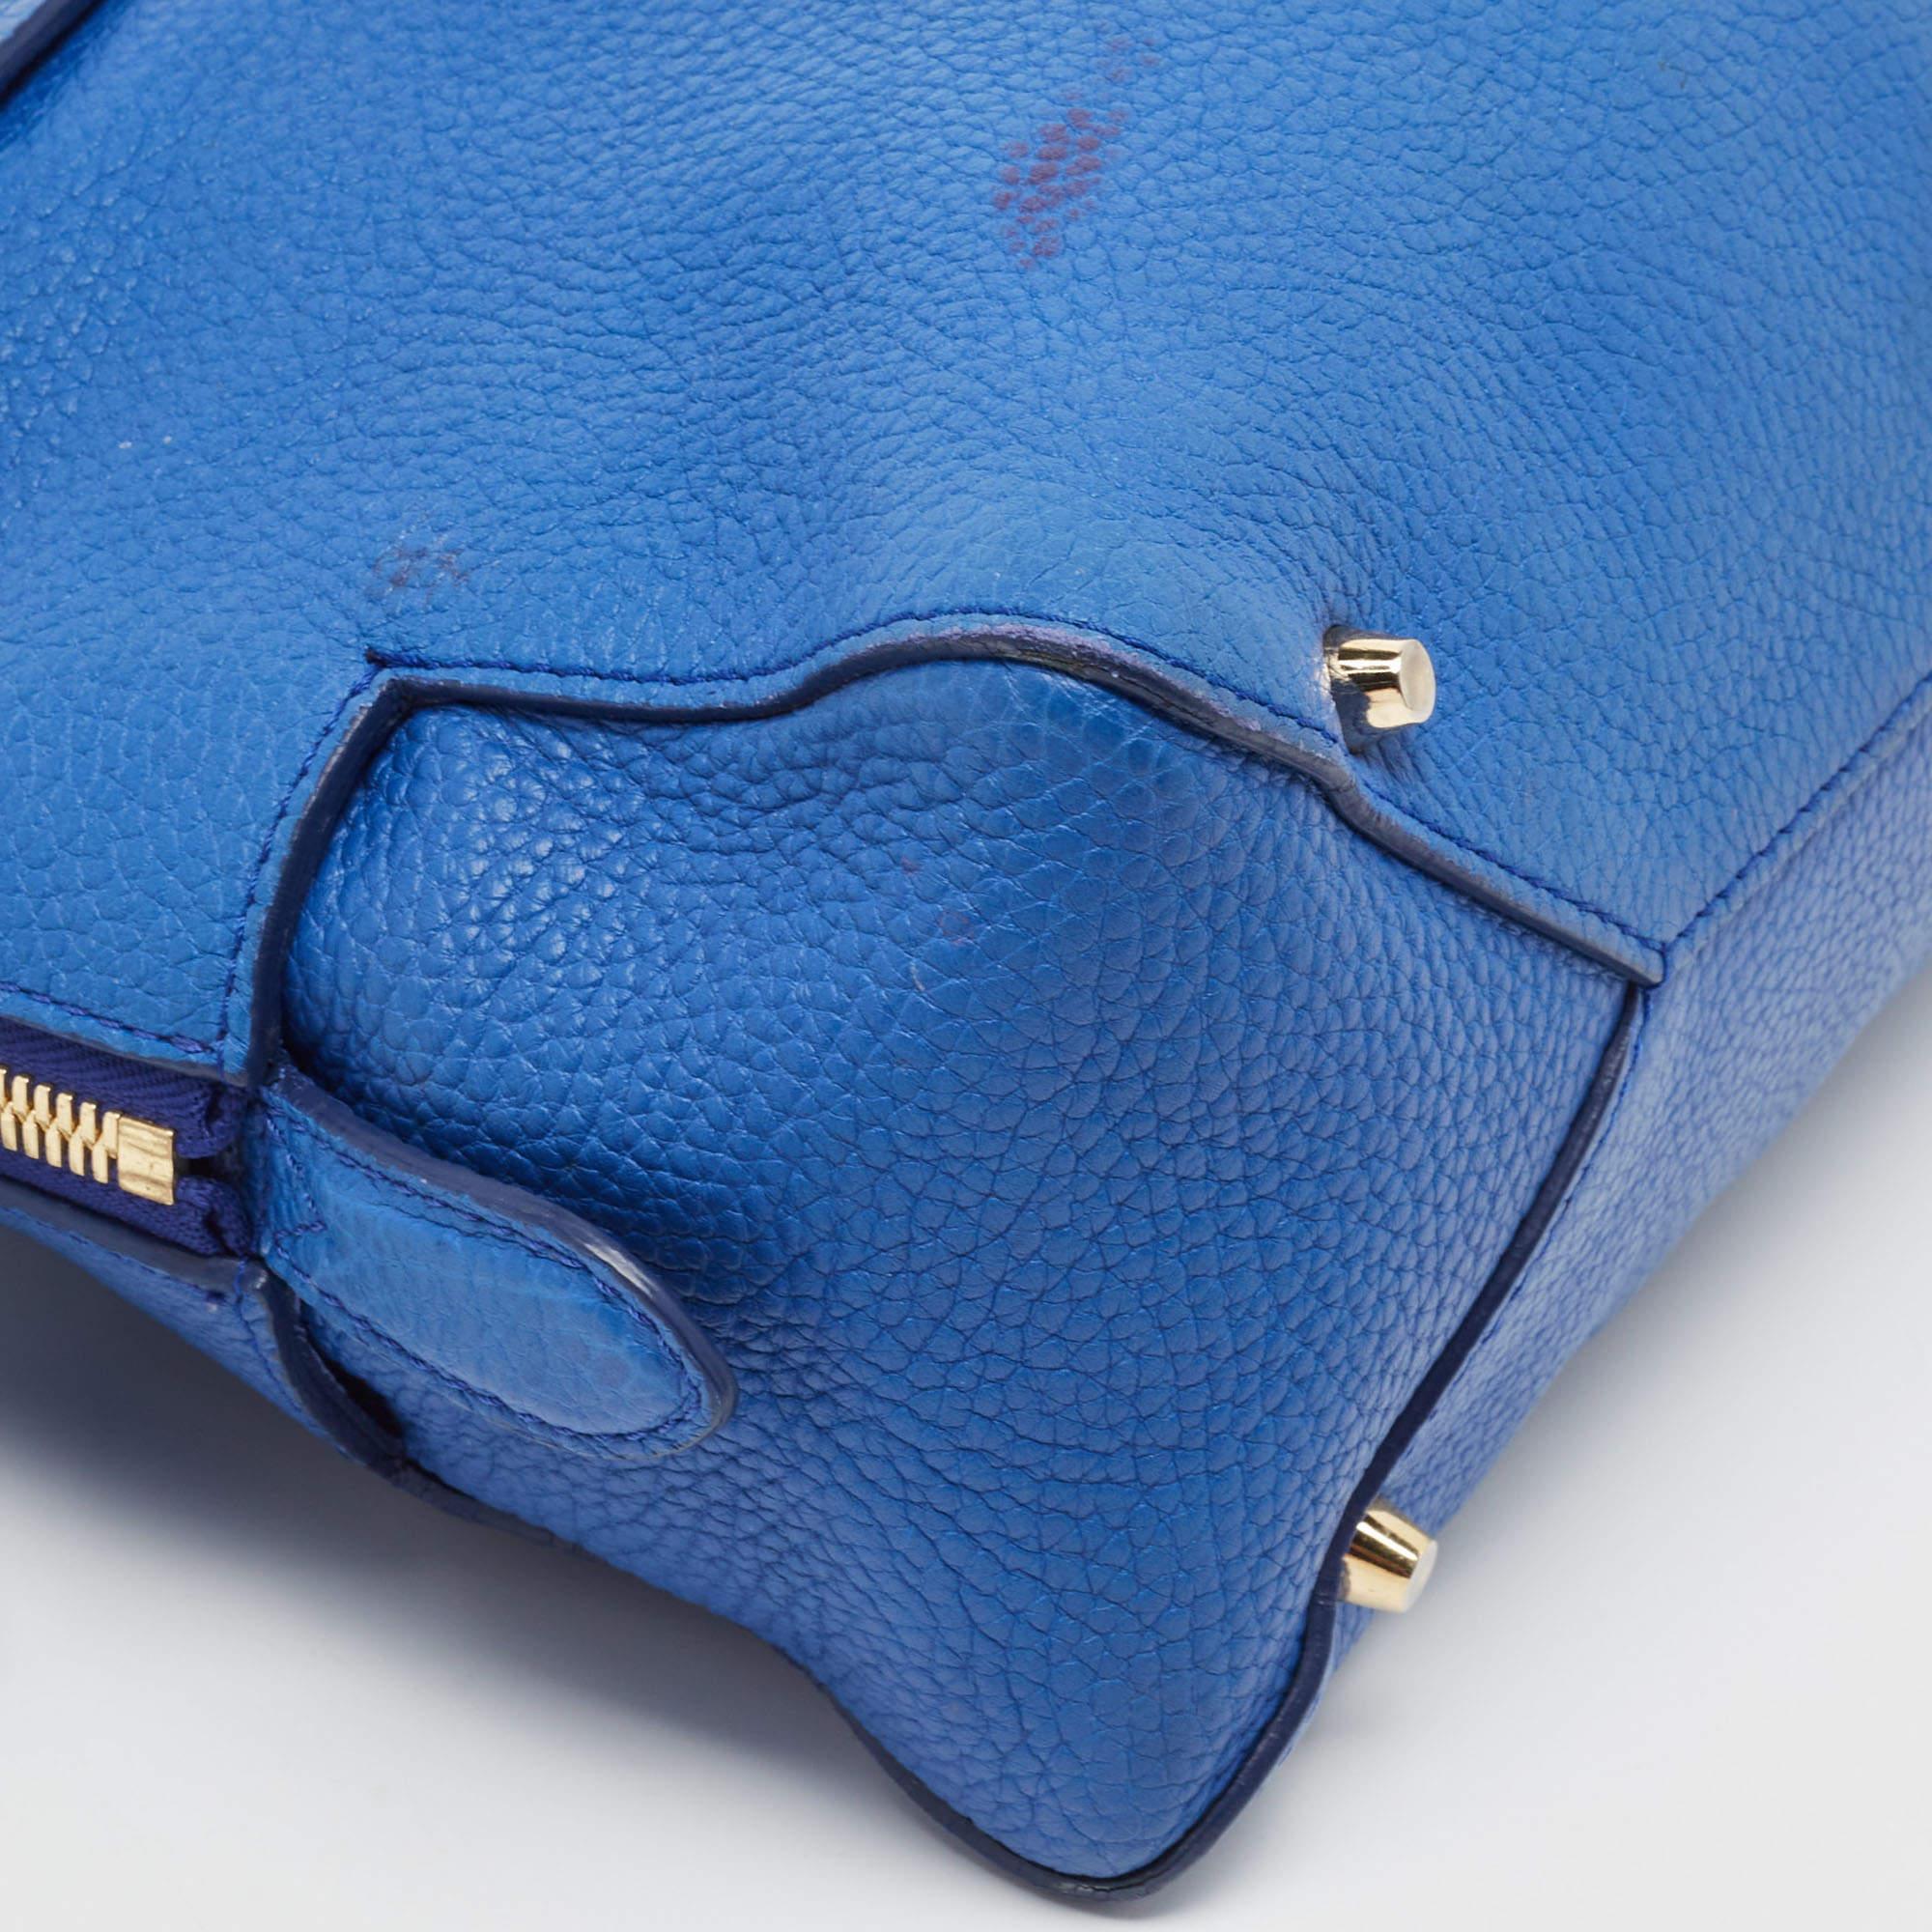 Burberry Blue Pebbled Leather Yorke Satchel For Sale 3